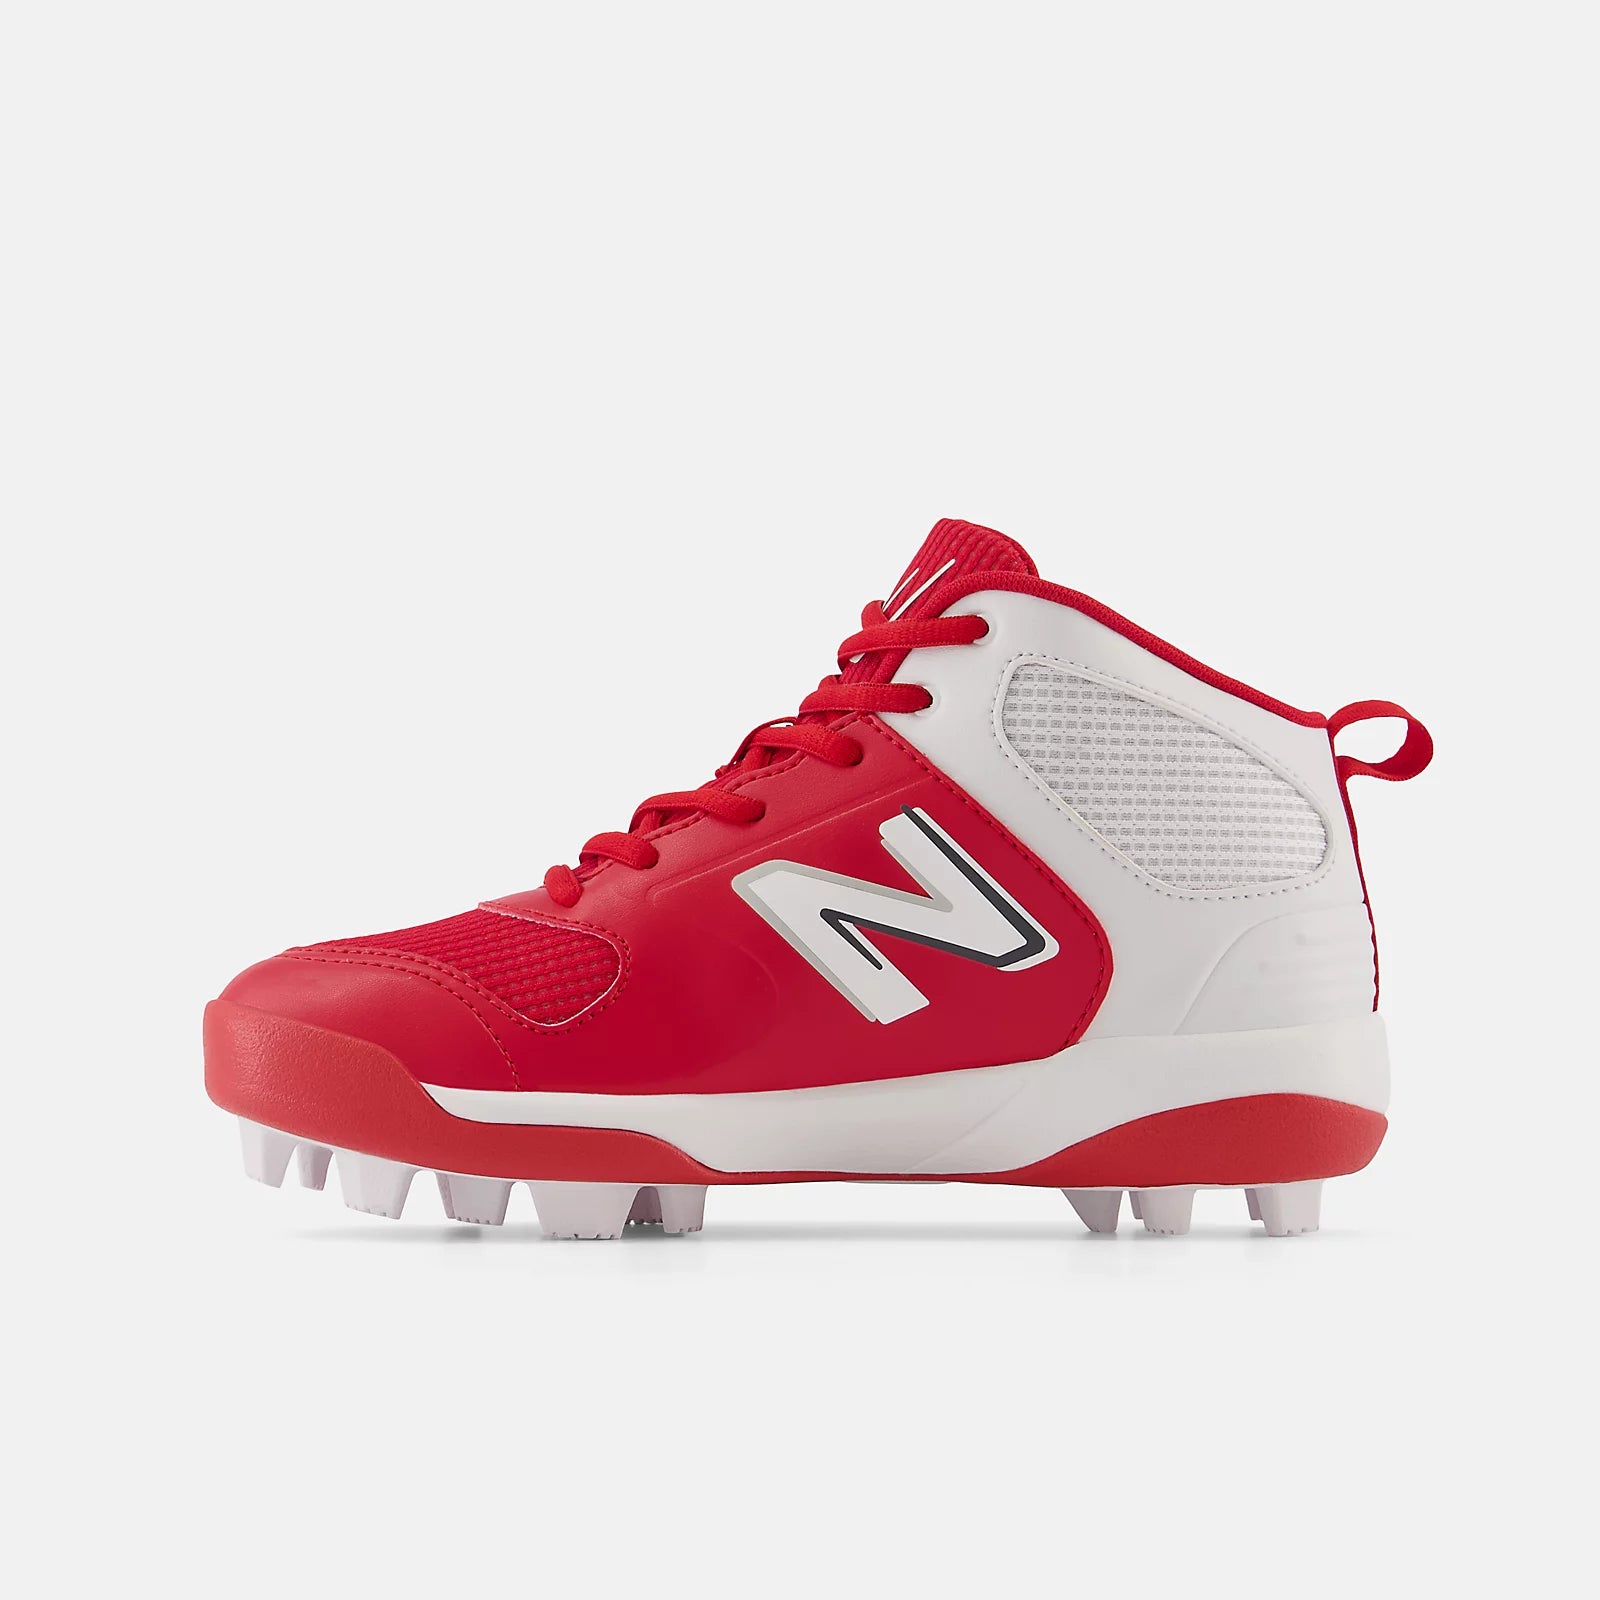 New Balance J3000v6 Red Youth Molded Cleats